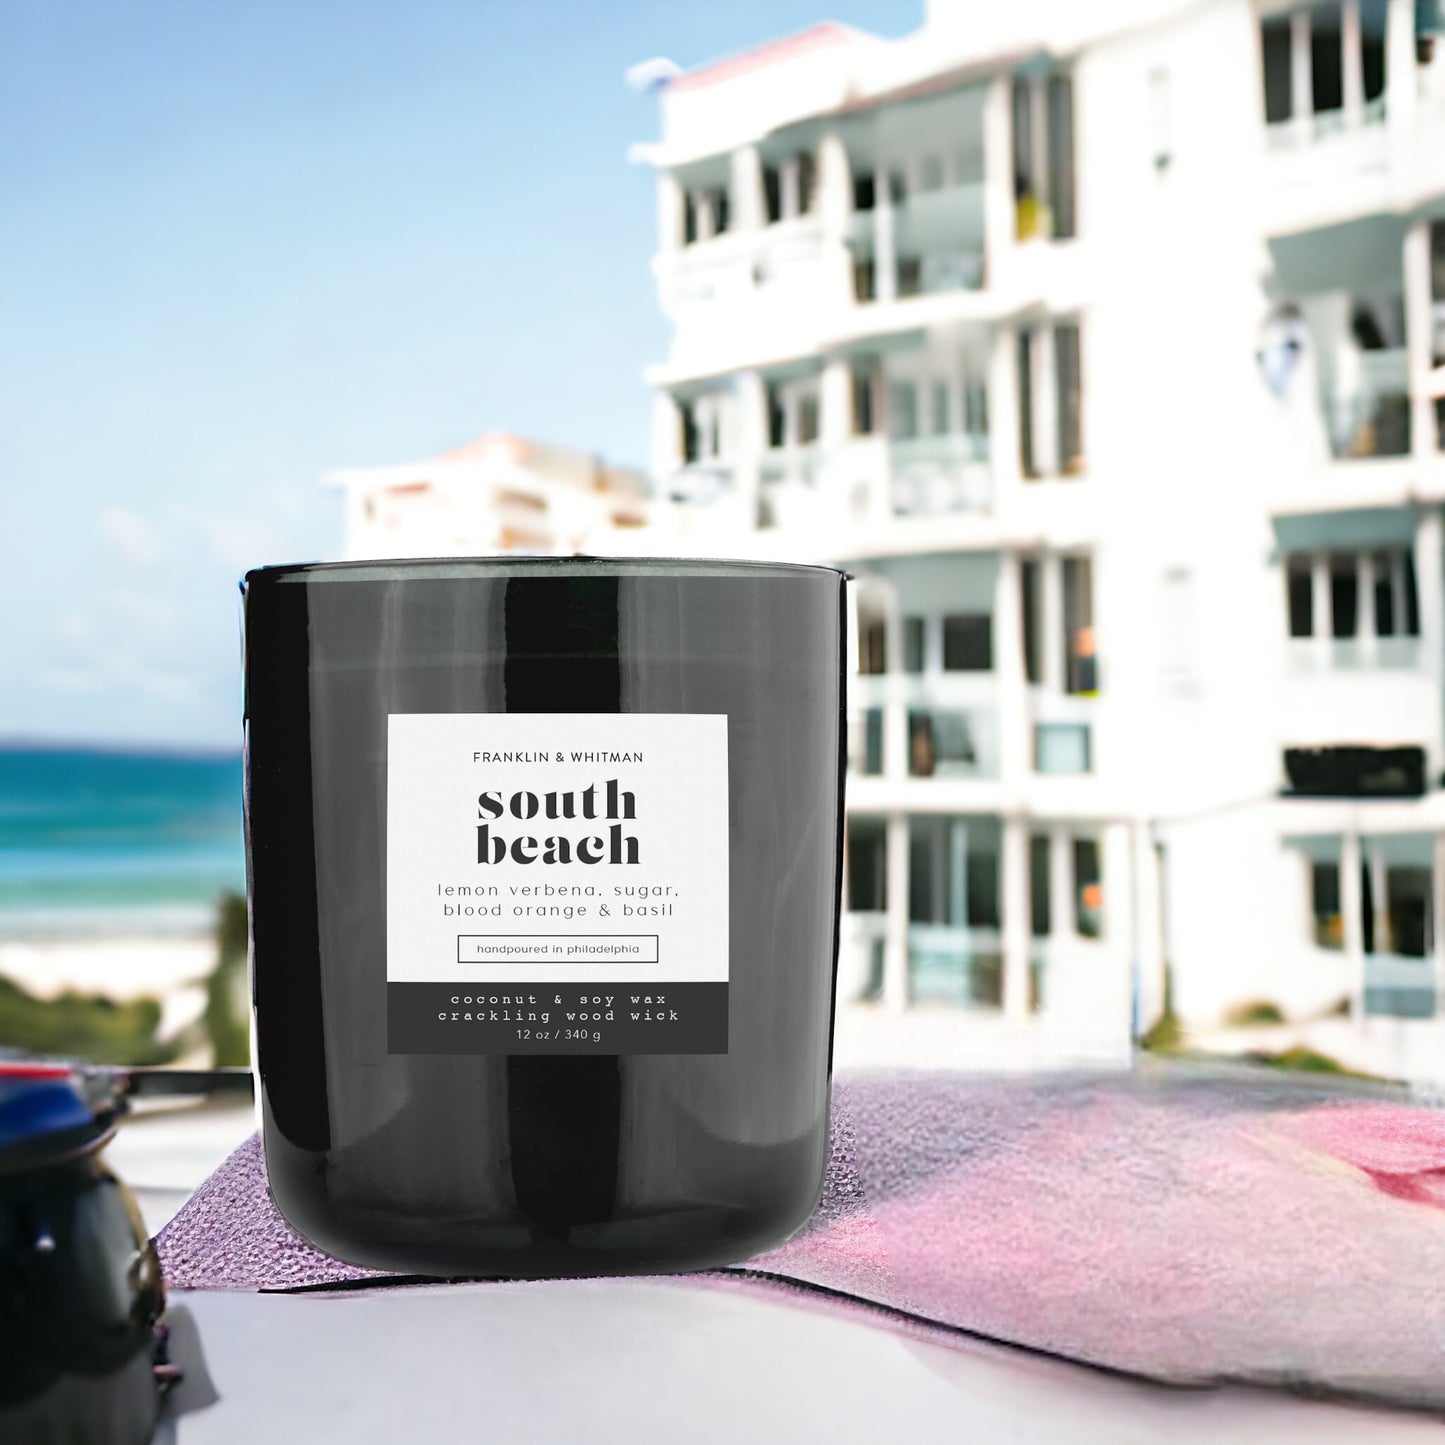 South Beach Candle